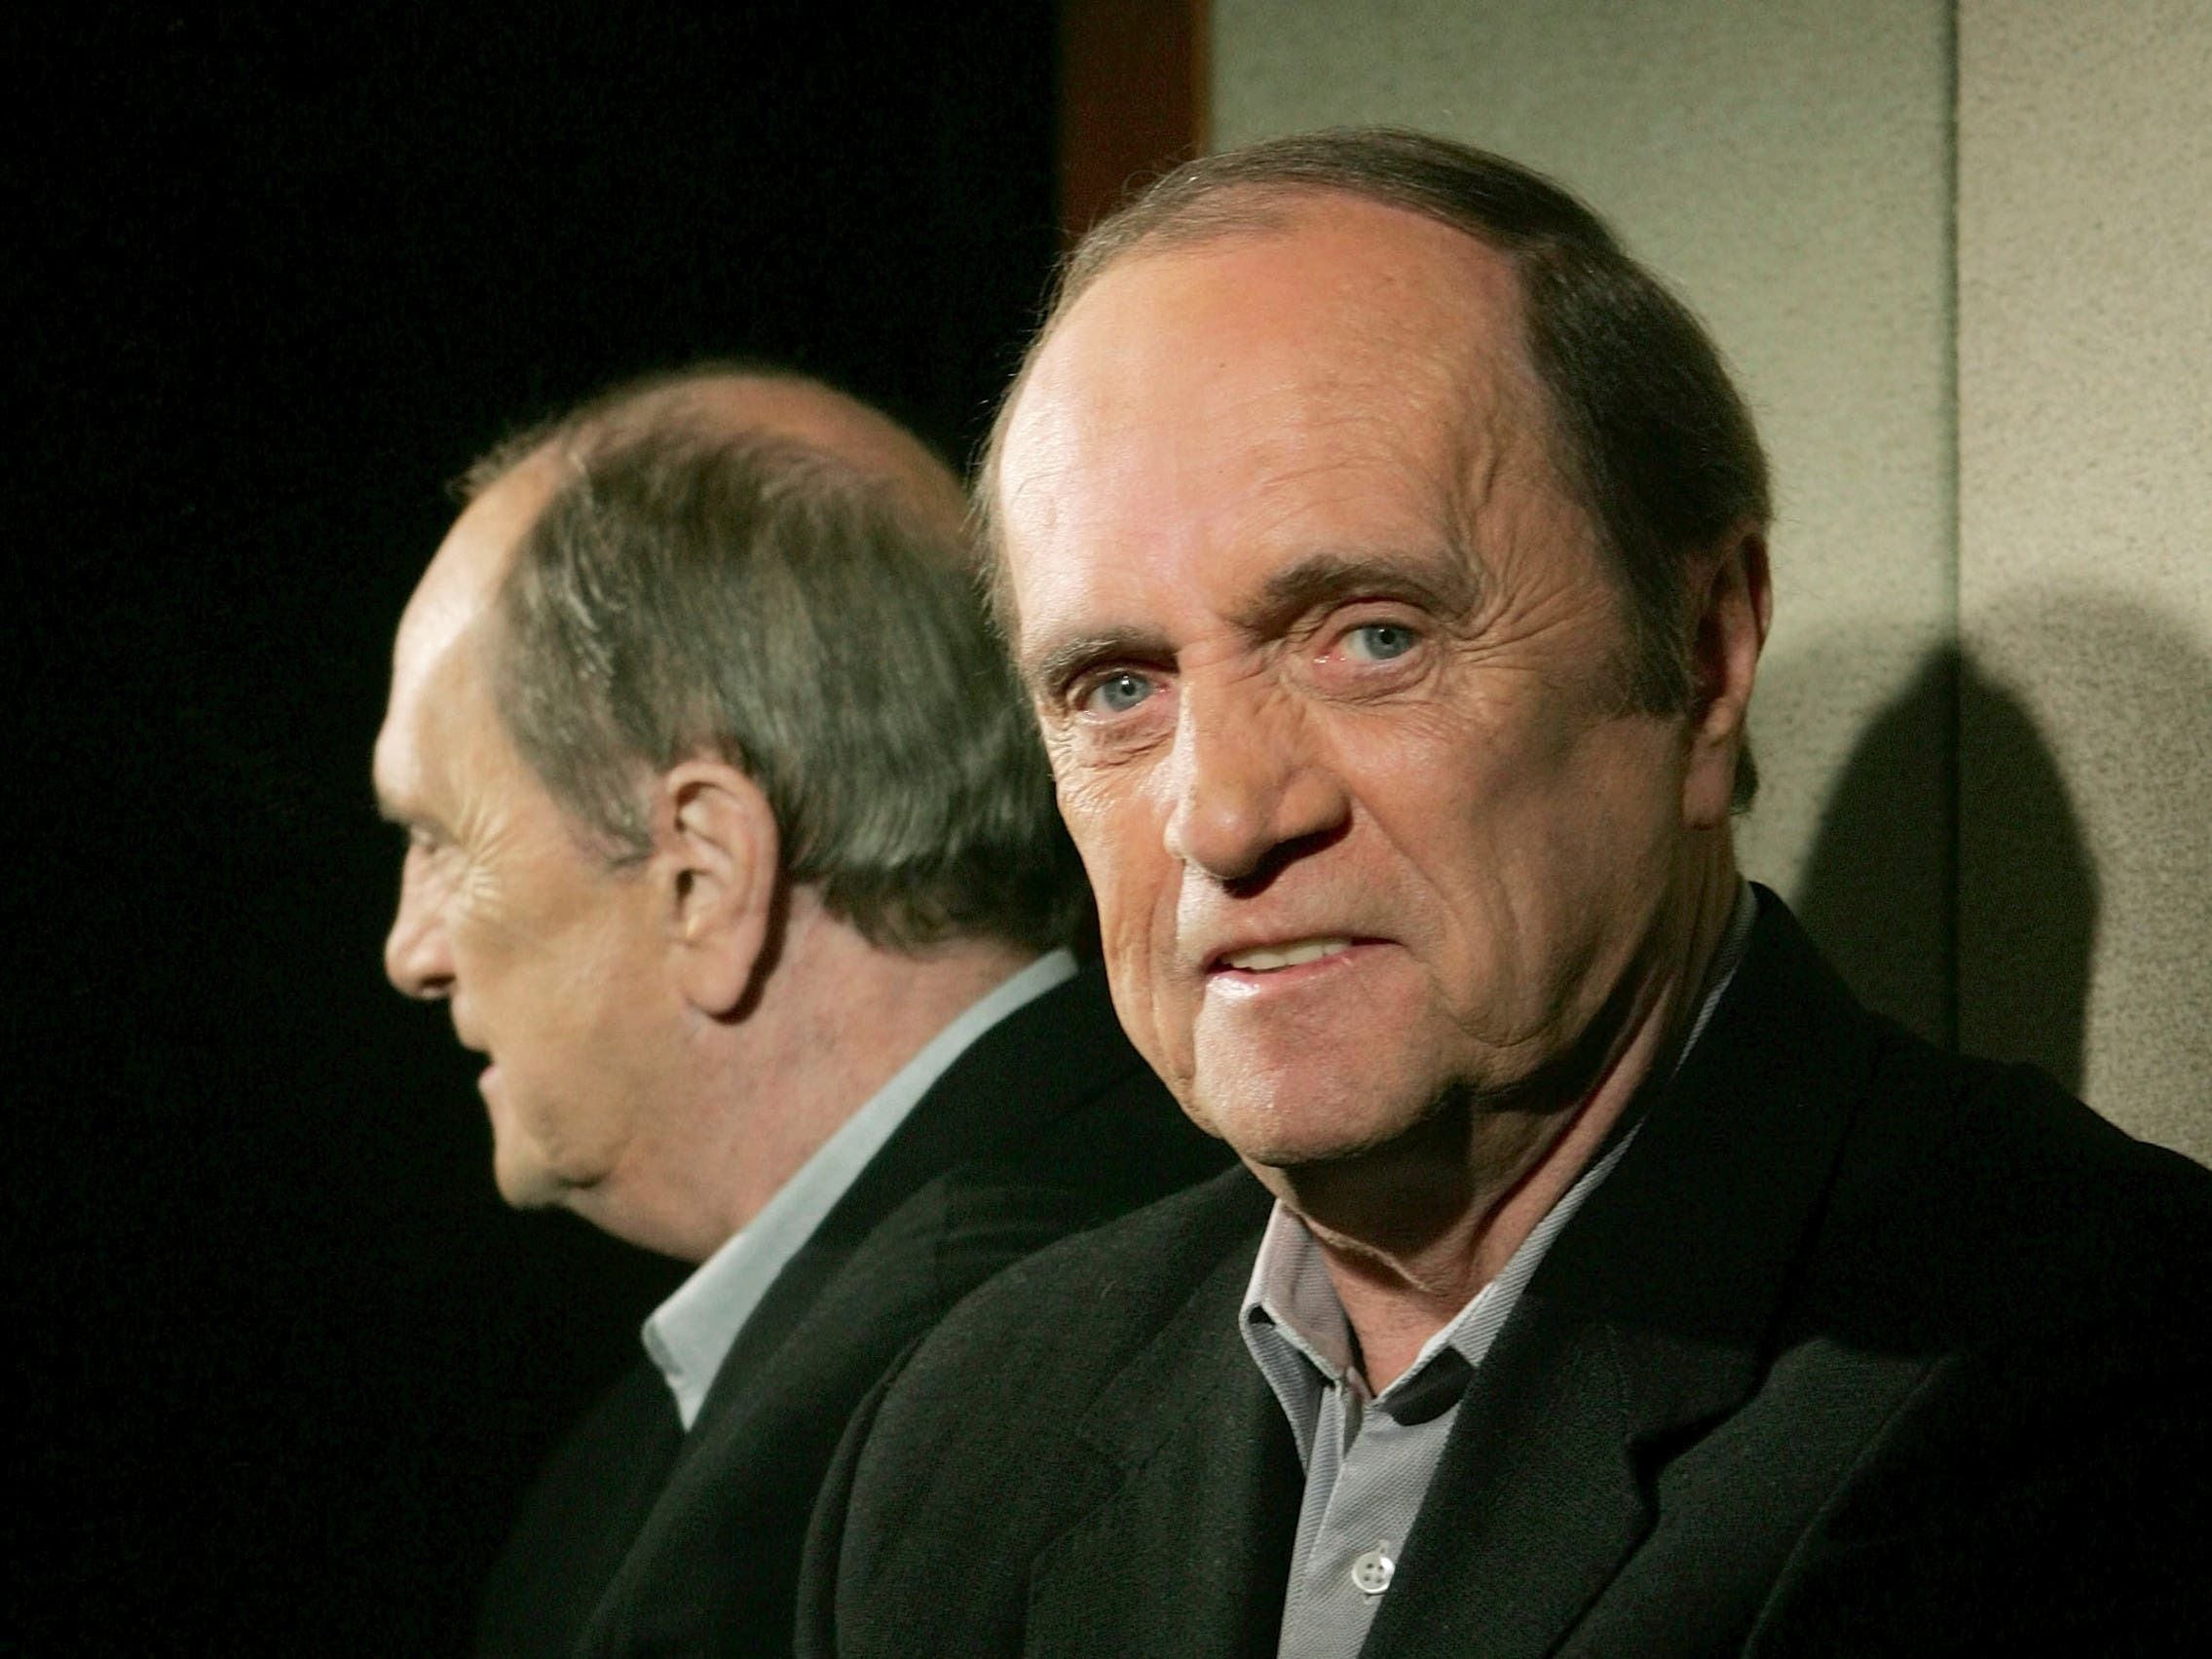 Mark Hamill among A-listers paying tribute to ‘one-of-a-kind’ Bob Newhart